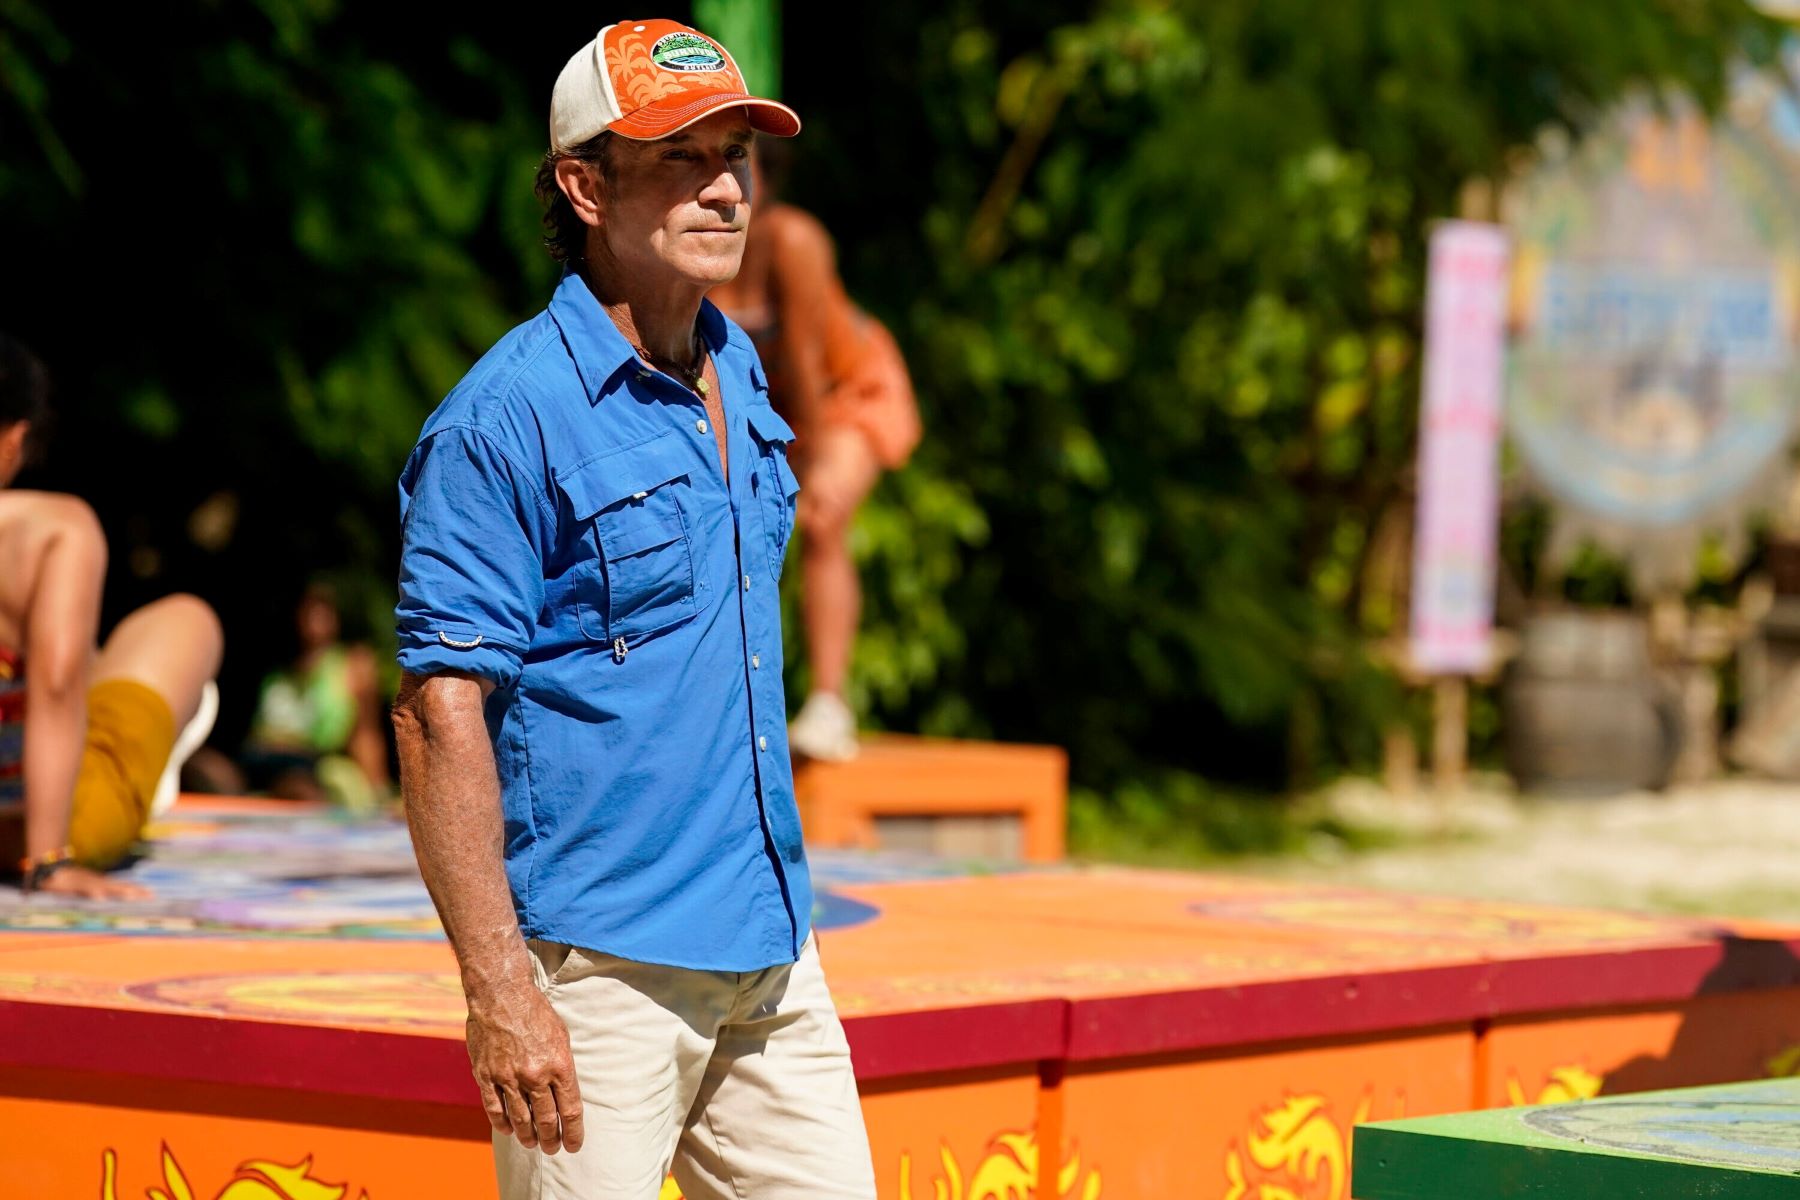 Jeff Probst, who hosts the 'Survivor 44' premiere, wears a blue button-up shirt with rolled-up sleeves, white shorts, and an orange and white 'Survivor' baseball cap.